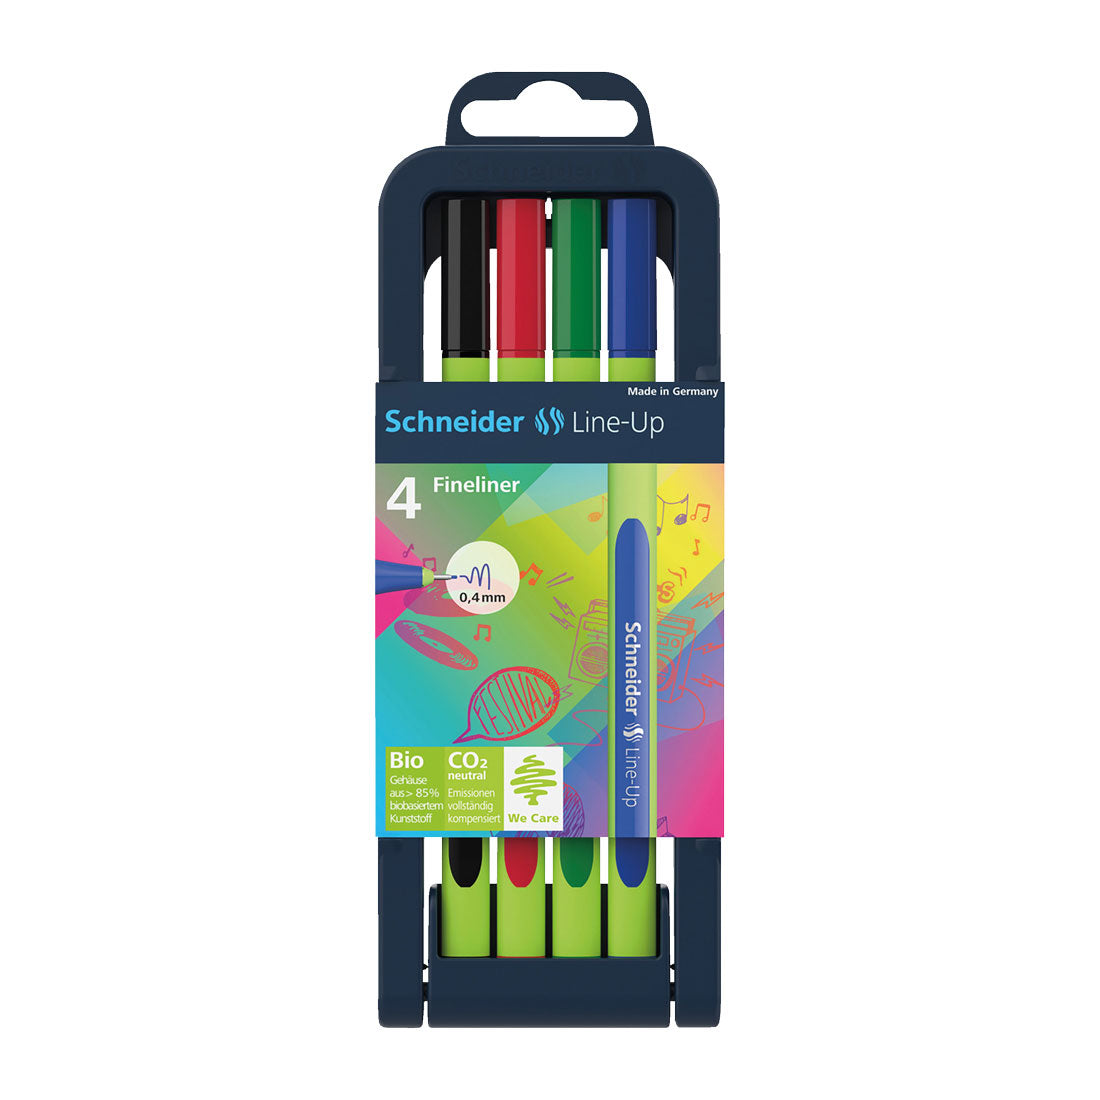 Line-Up Fineliners 0.4mm with Case stand, 4 pieces